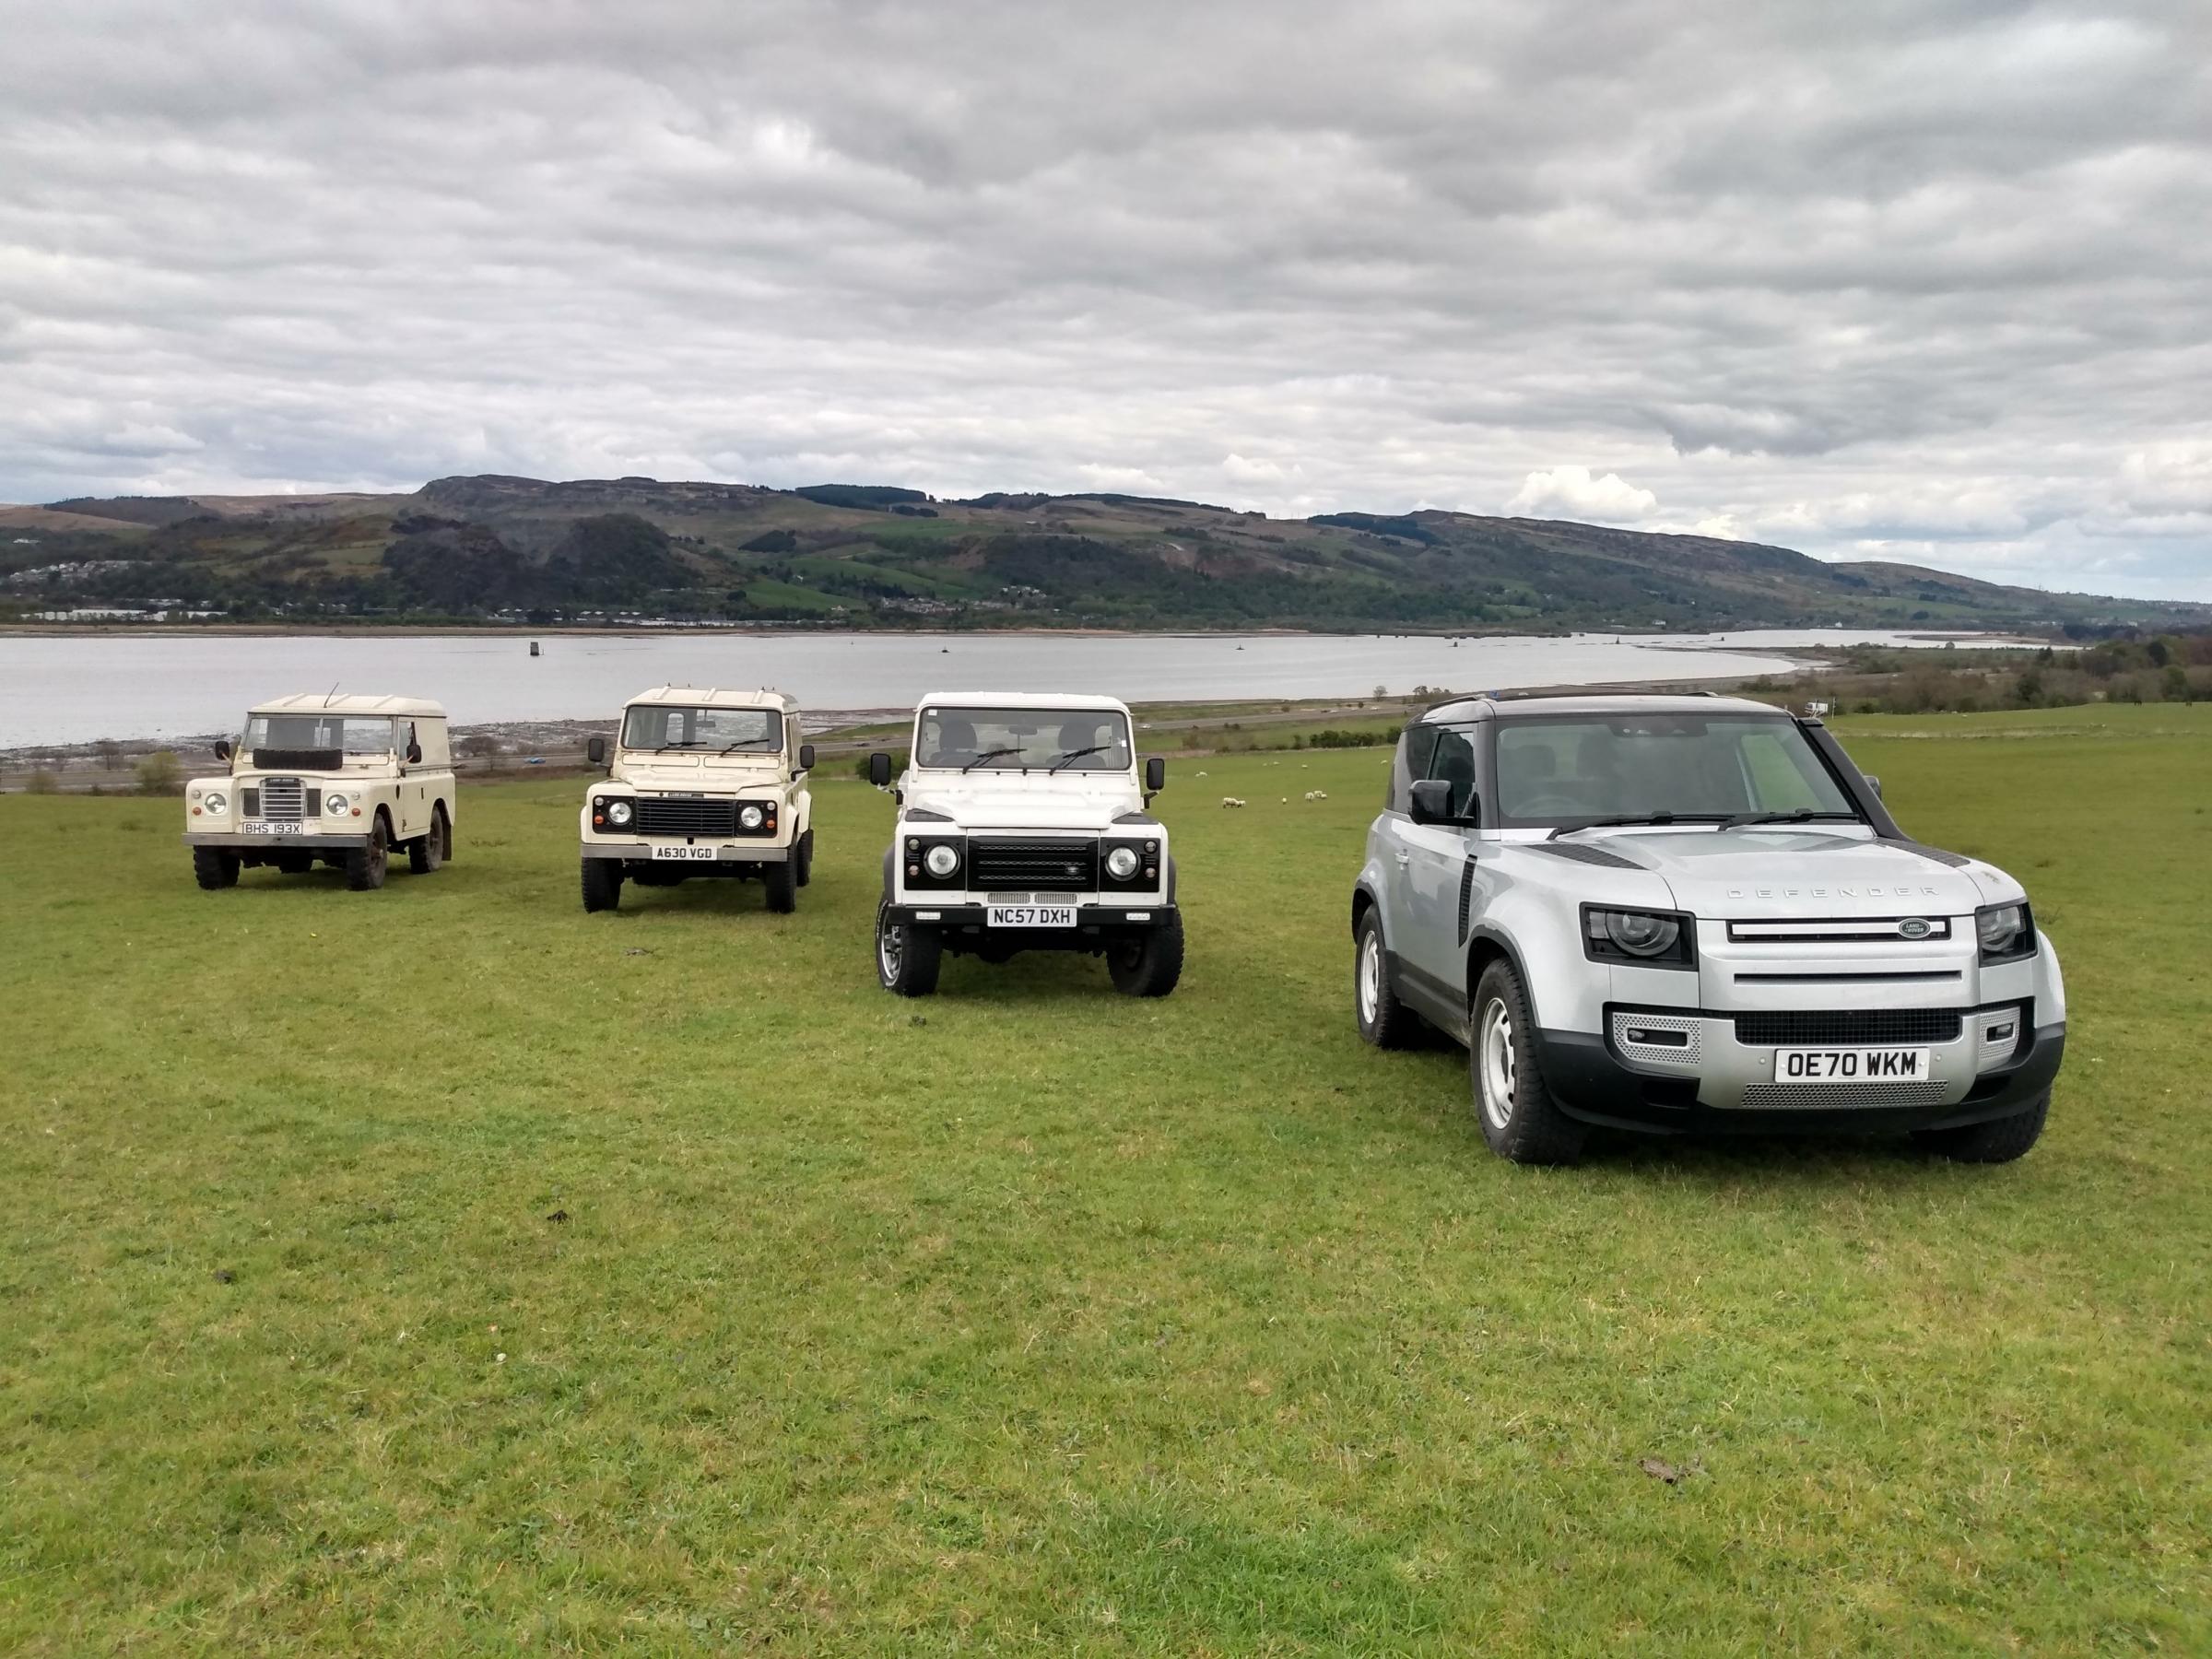 Its a generation thing ... the new Land Rover Defender only has a passing resemblance to the previous family